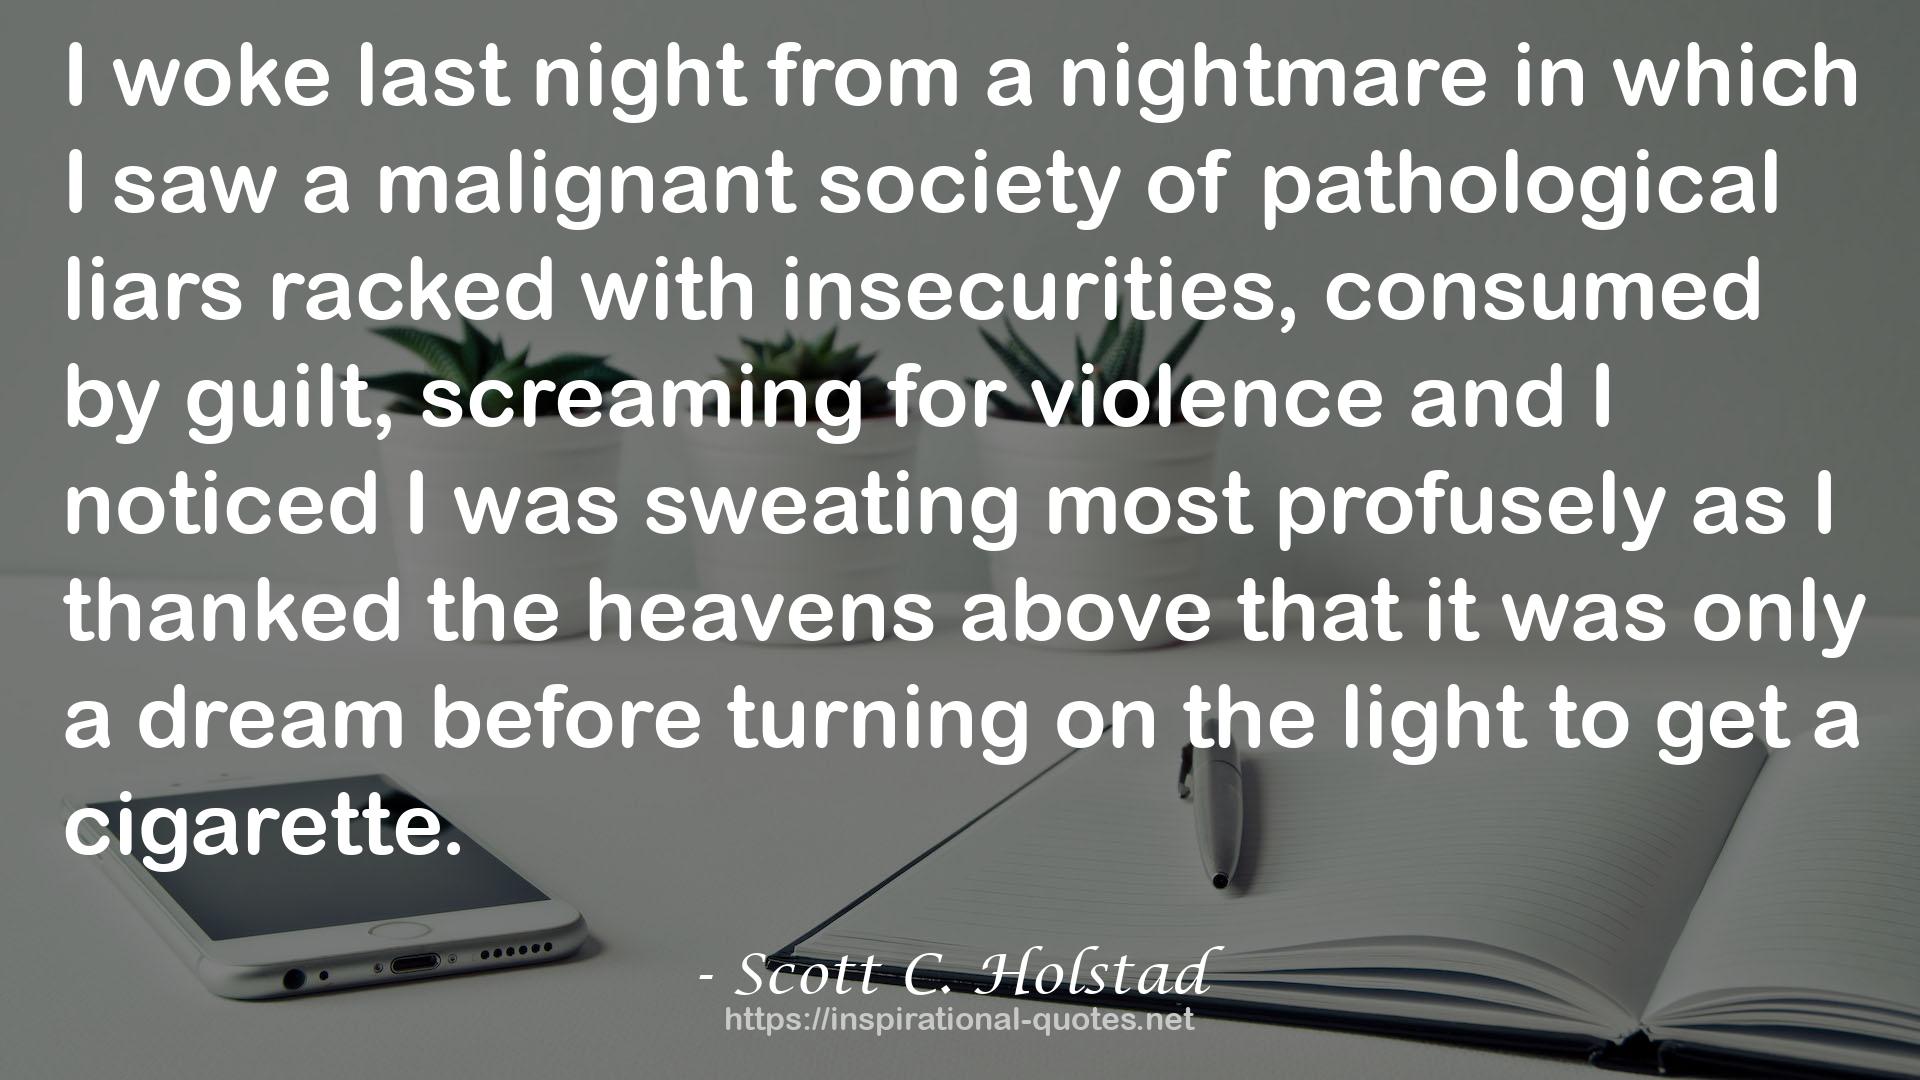 Scott C. Holstad quote : I woke last night from a nightmare in which I saw a malignant society of pathological liars racked with insecurities, consumed by guilt, screaming for violence and I noticed I was sweating most profusely as I thanked the heavens above that it was only a dream before turning on the light to get a cigarette.